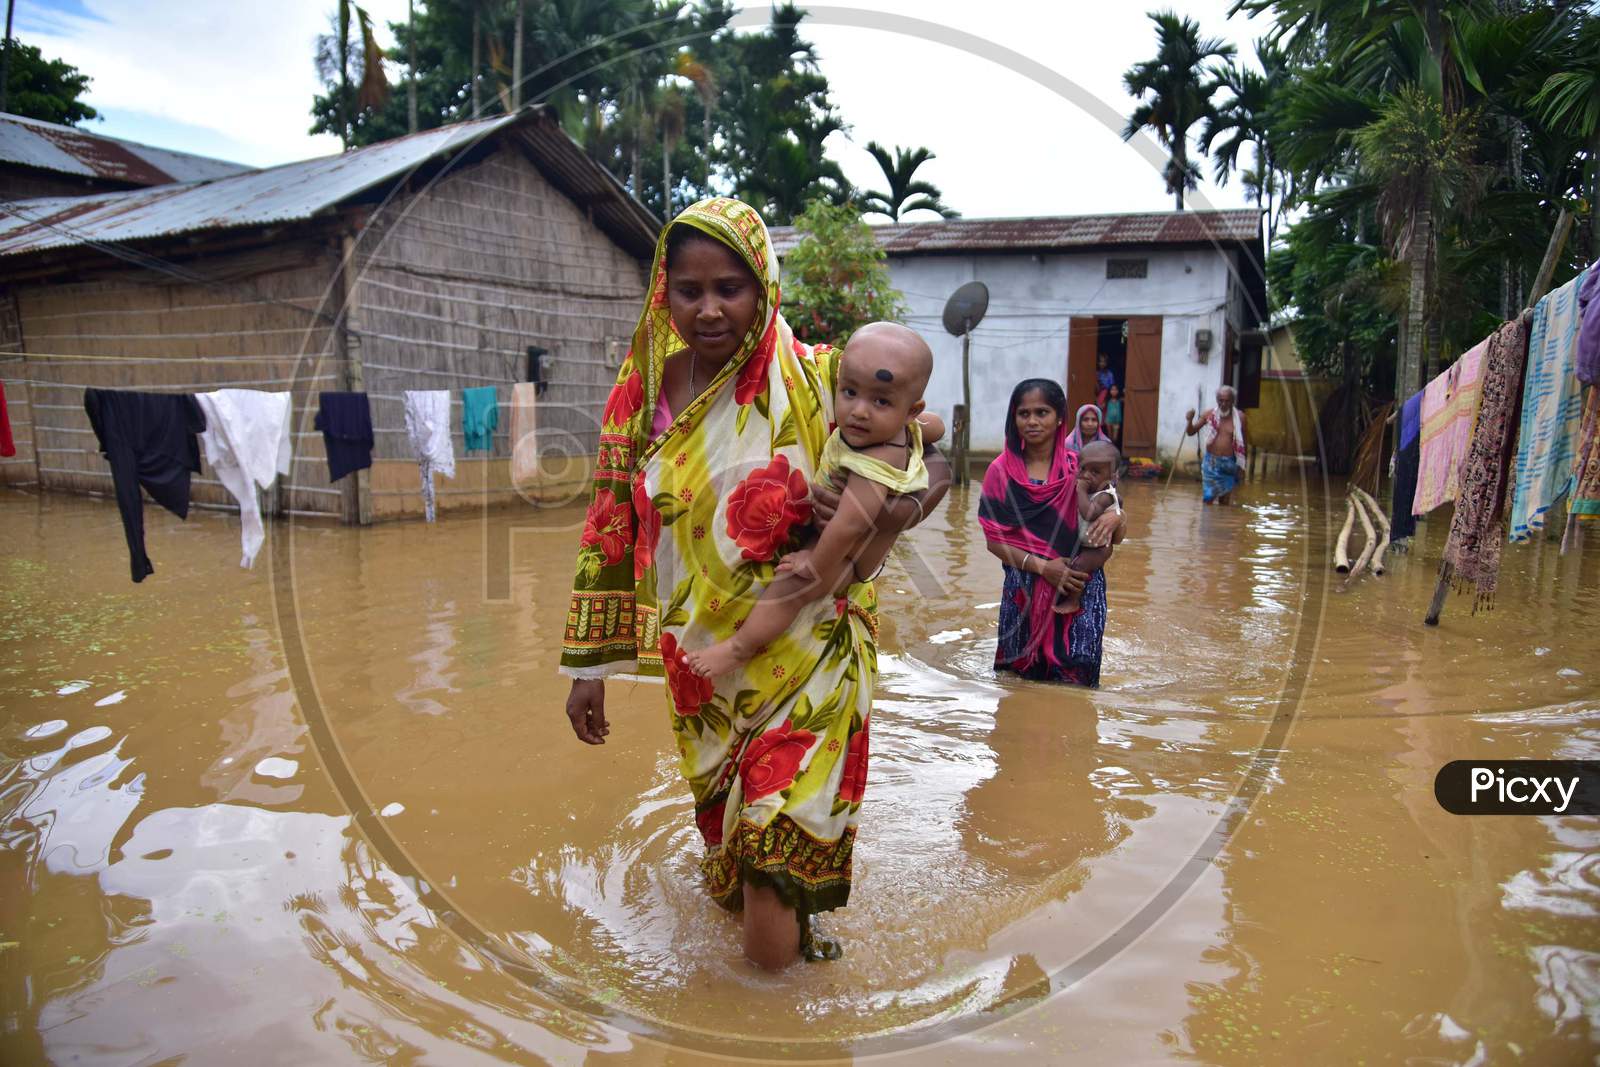 Two women wade through floodwaters in a flood-affected village in Nagaon, Assam on July 22, 2020